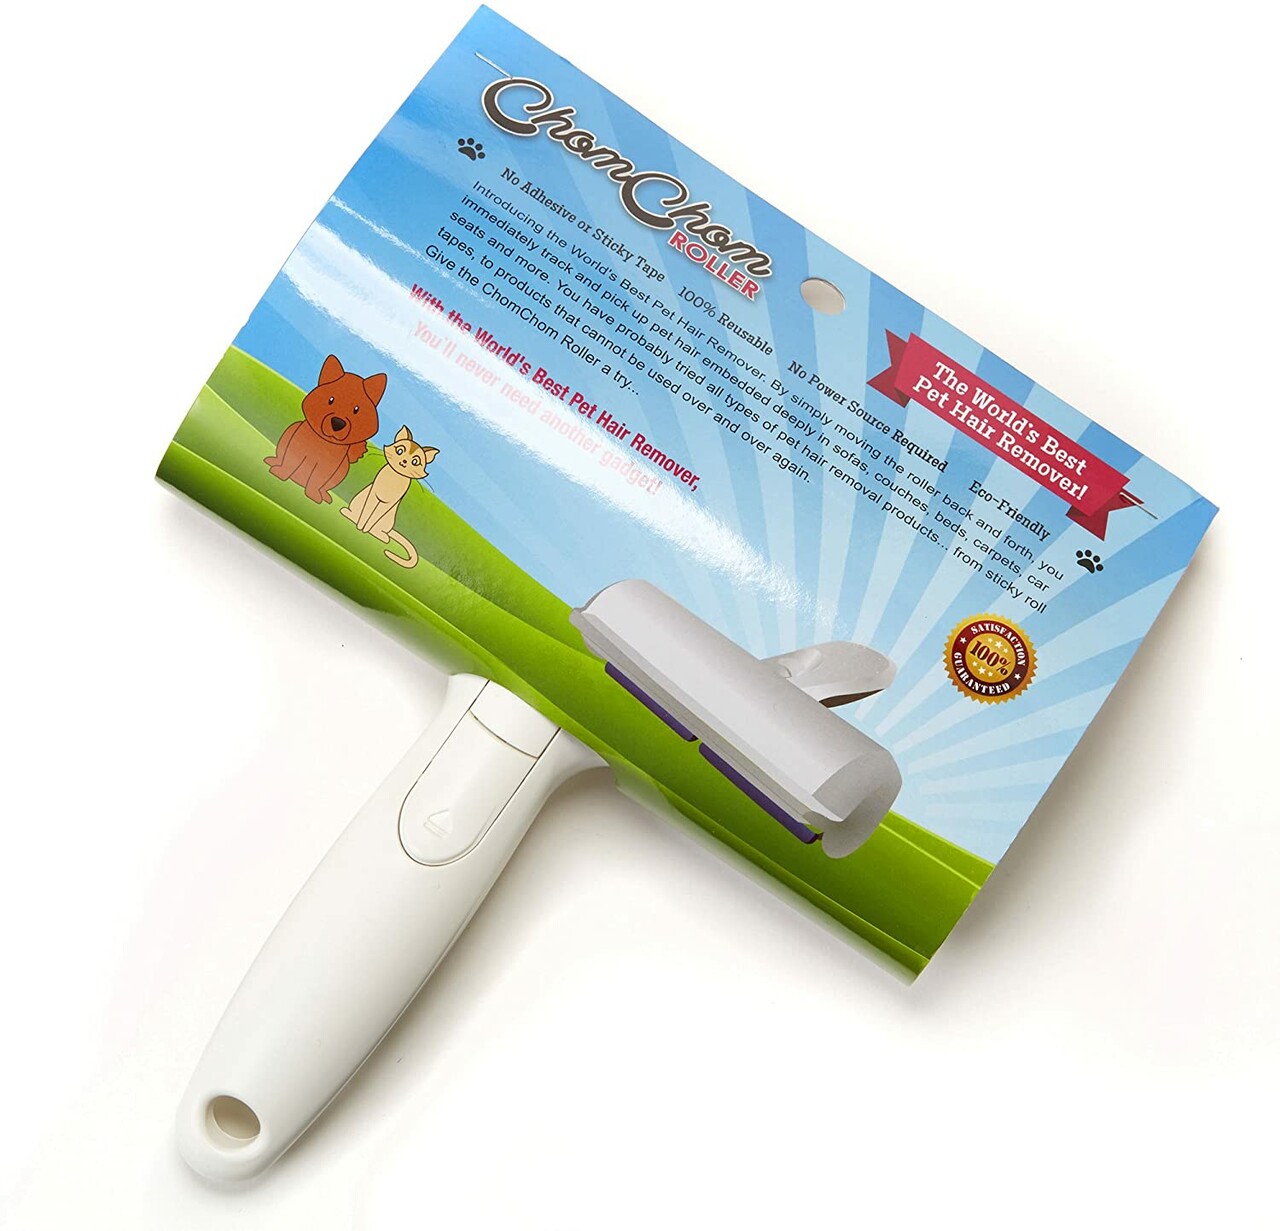 Image of: ChomChom Roller Pet Hair Remover